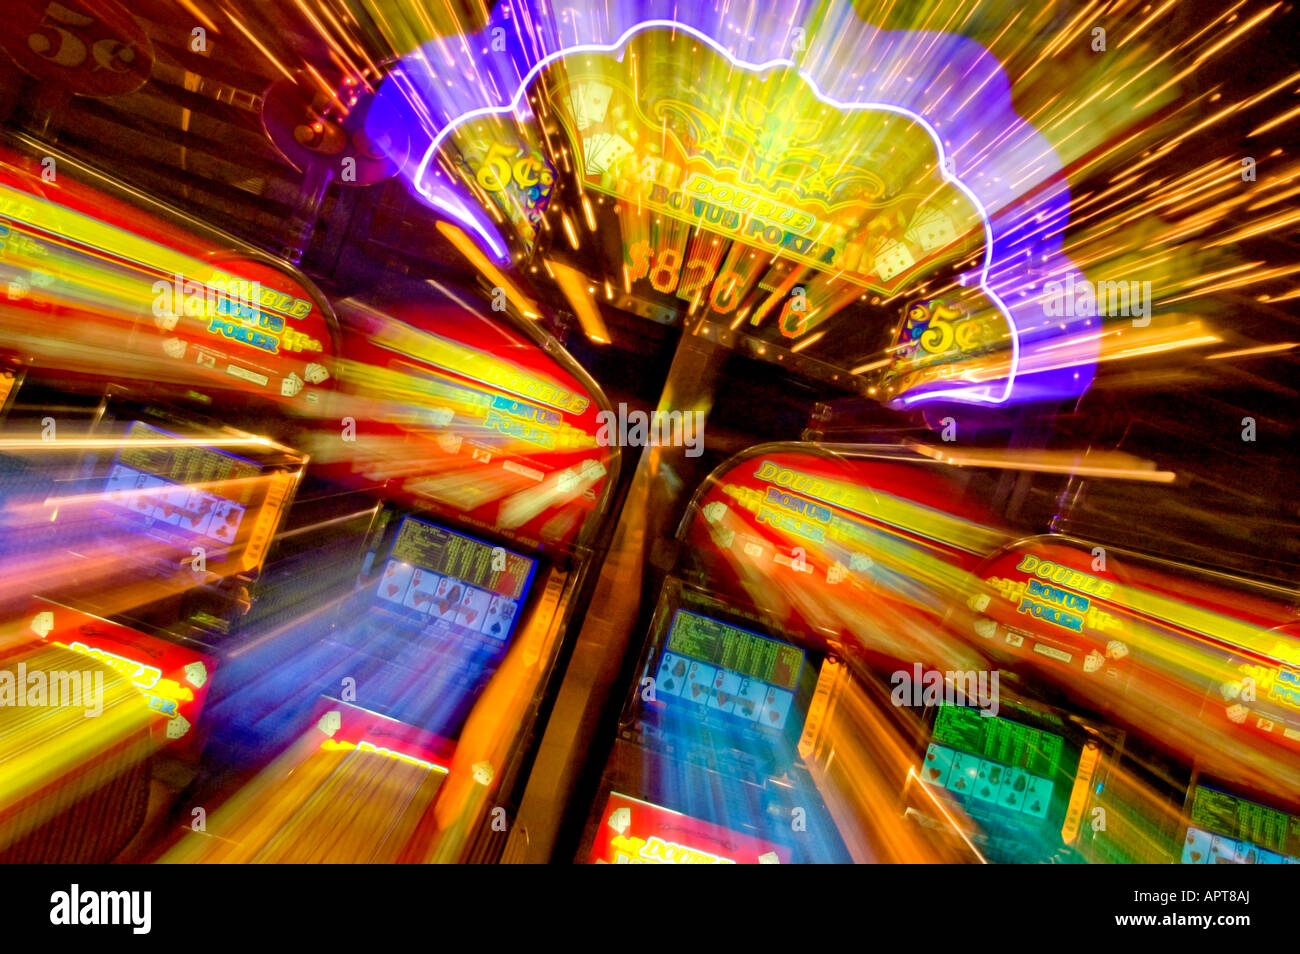 casino lights slot machines blurred and out of focus Stock Photo - Alamy